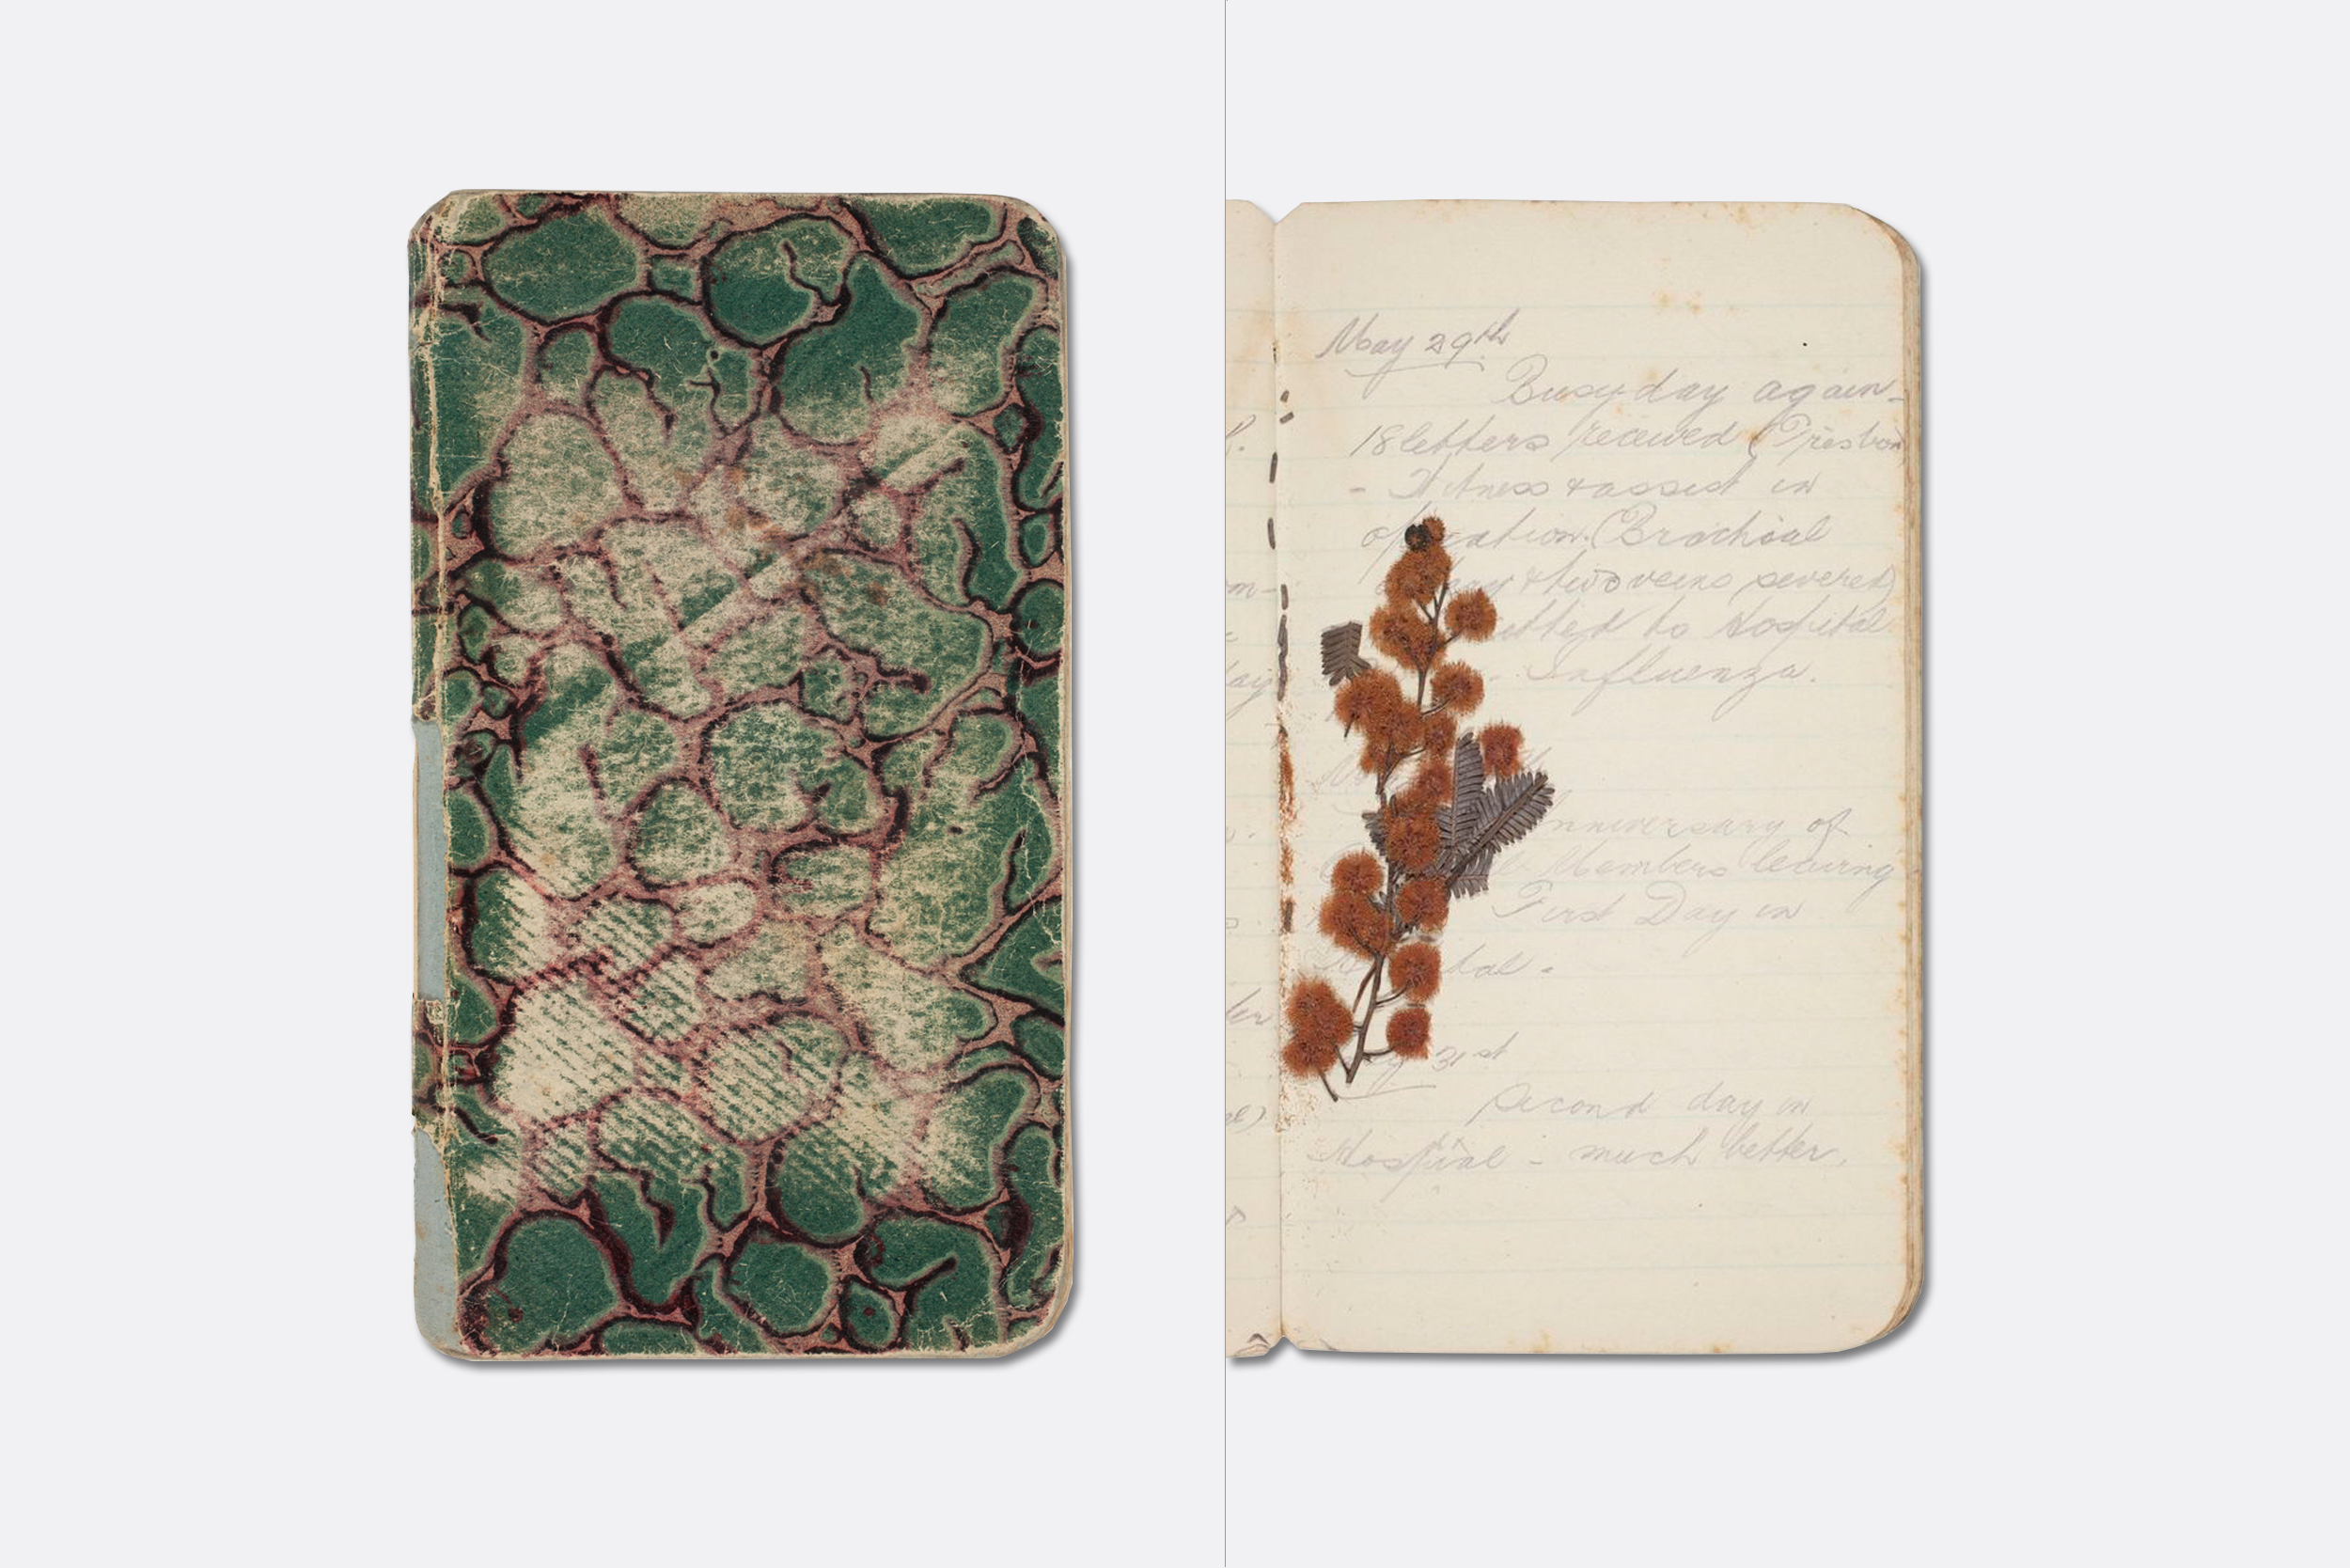  James Brunton Gibb war diary, 1916. Pressed wattle are inserted between the pages. Image courtesy of the Mitchell Library, State Library of New South Wales. 